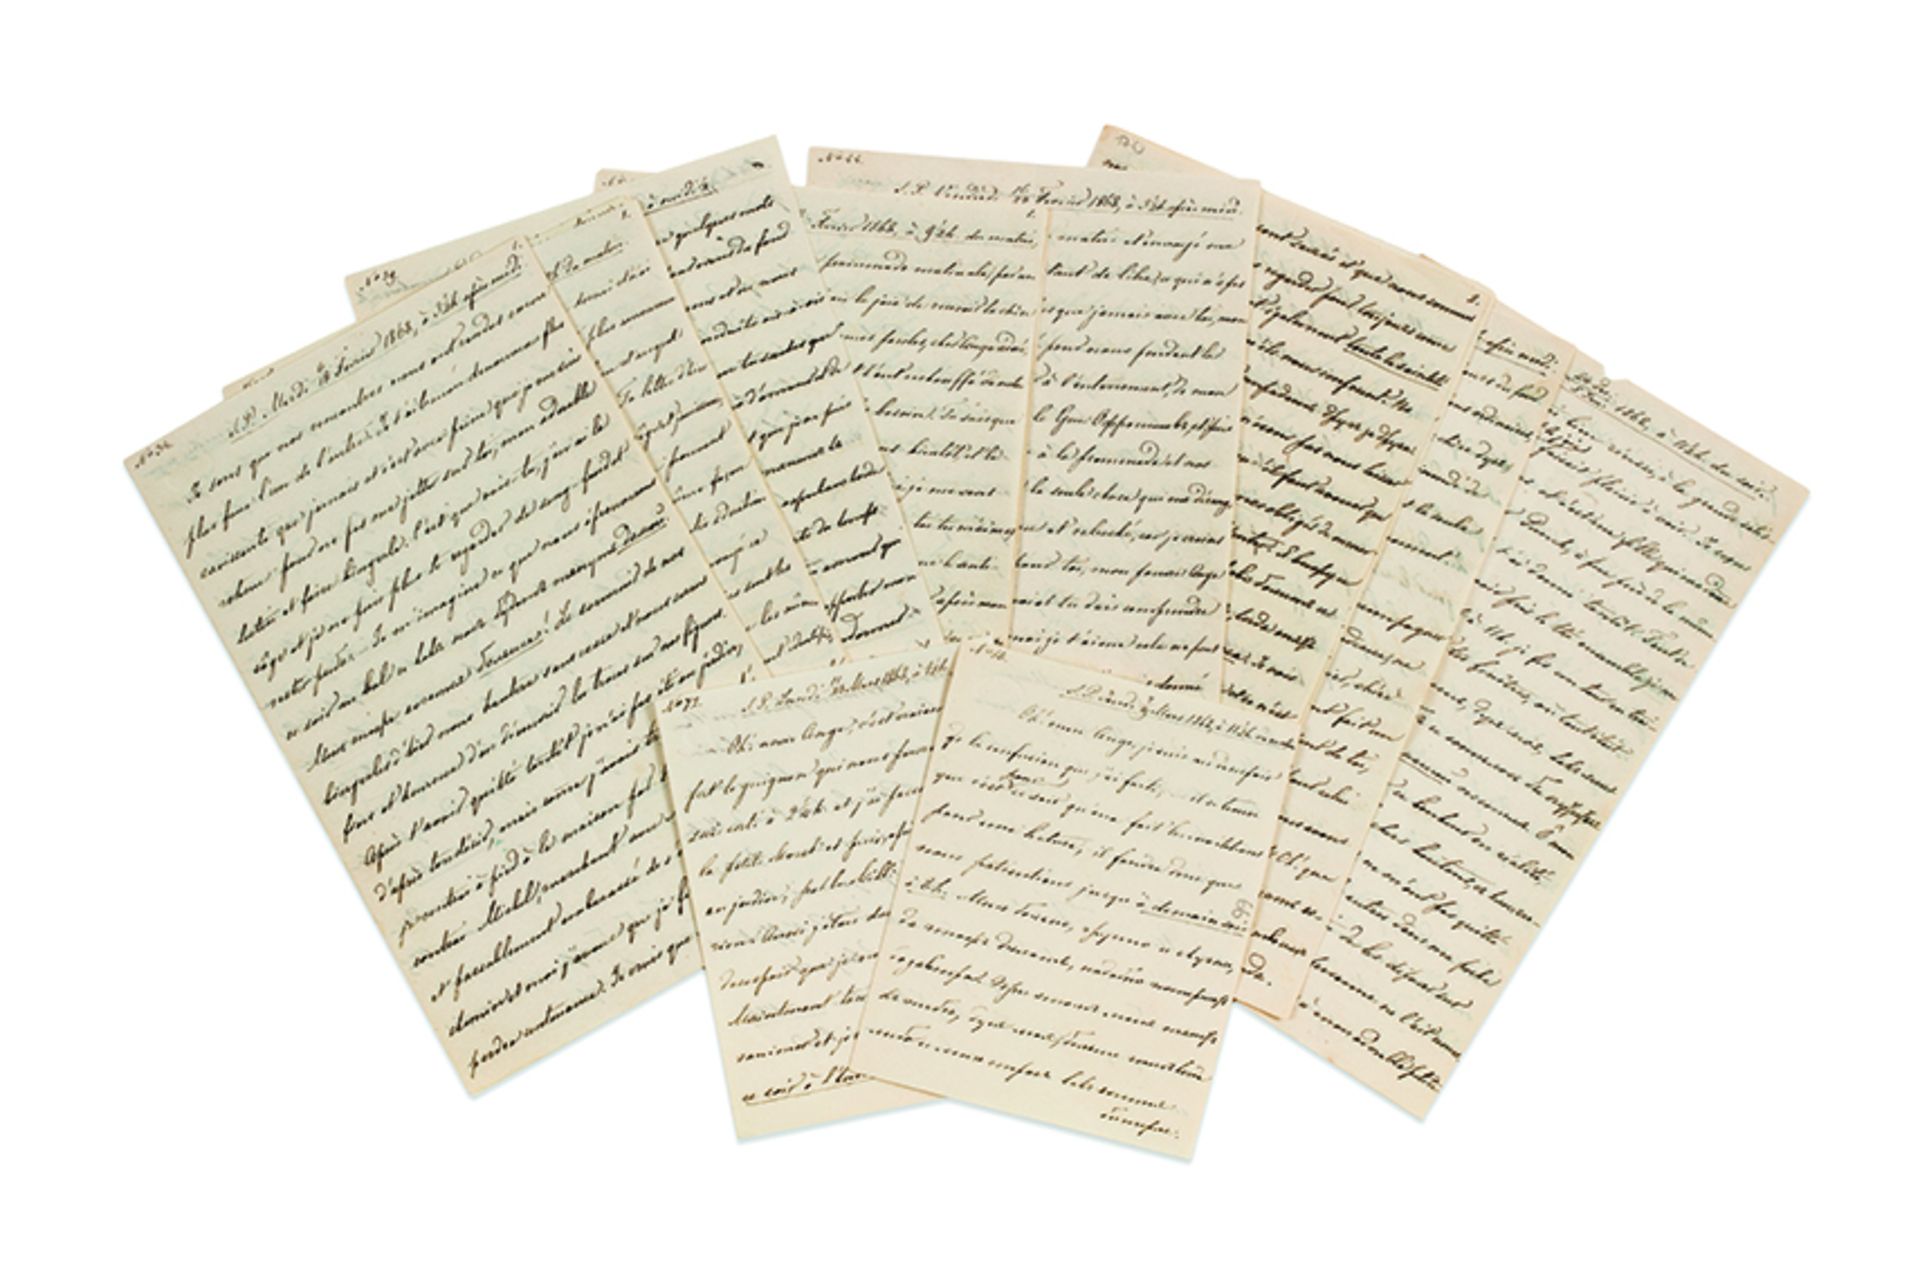 ALEXANDER II of Russia. 1818-1881. - Autograph letter. St. Petersburg, Monday March [...]